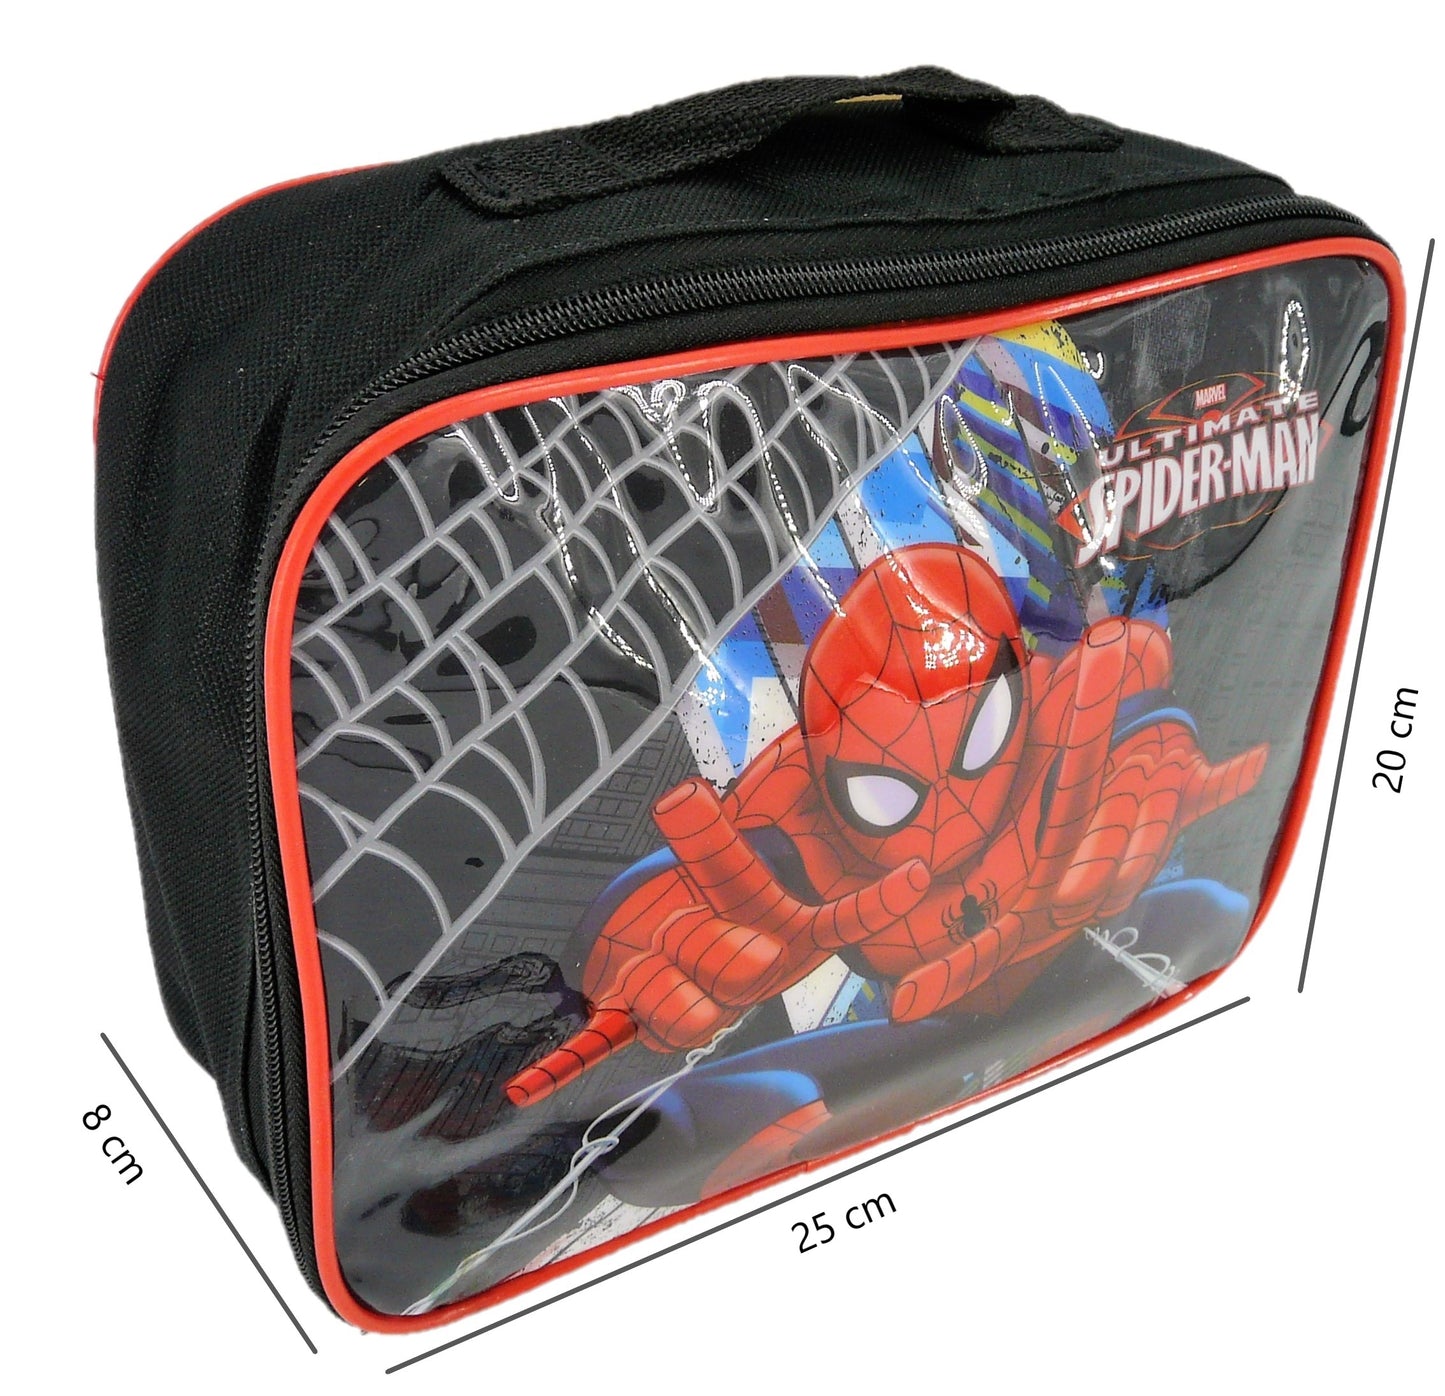 The Ultimate Spider-Man Children's Insulated Lunch Bag